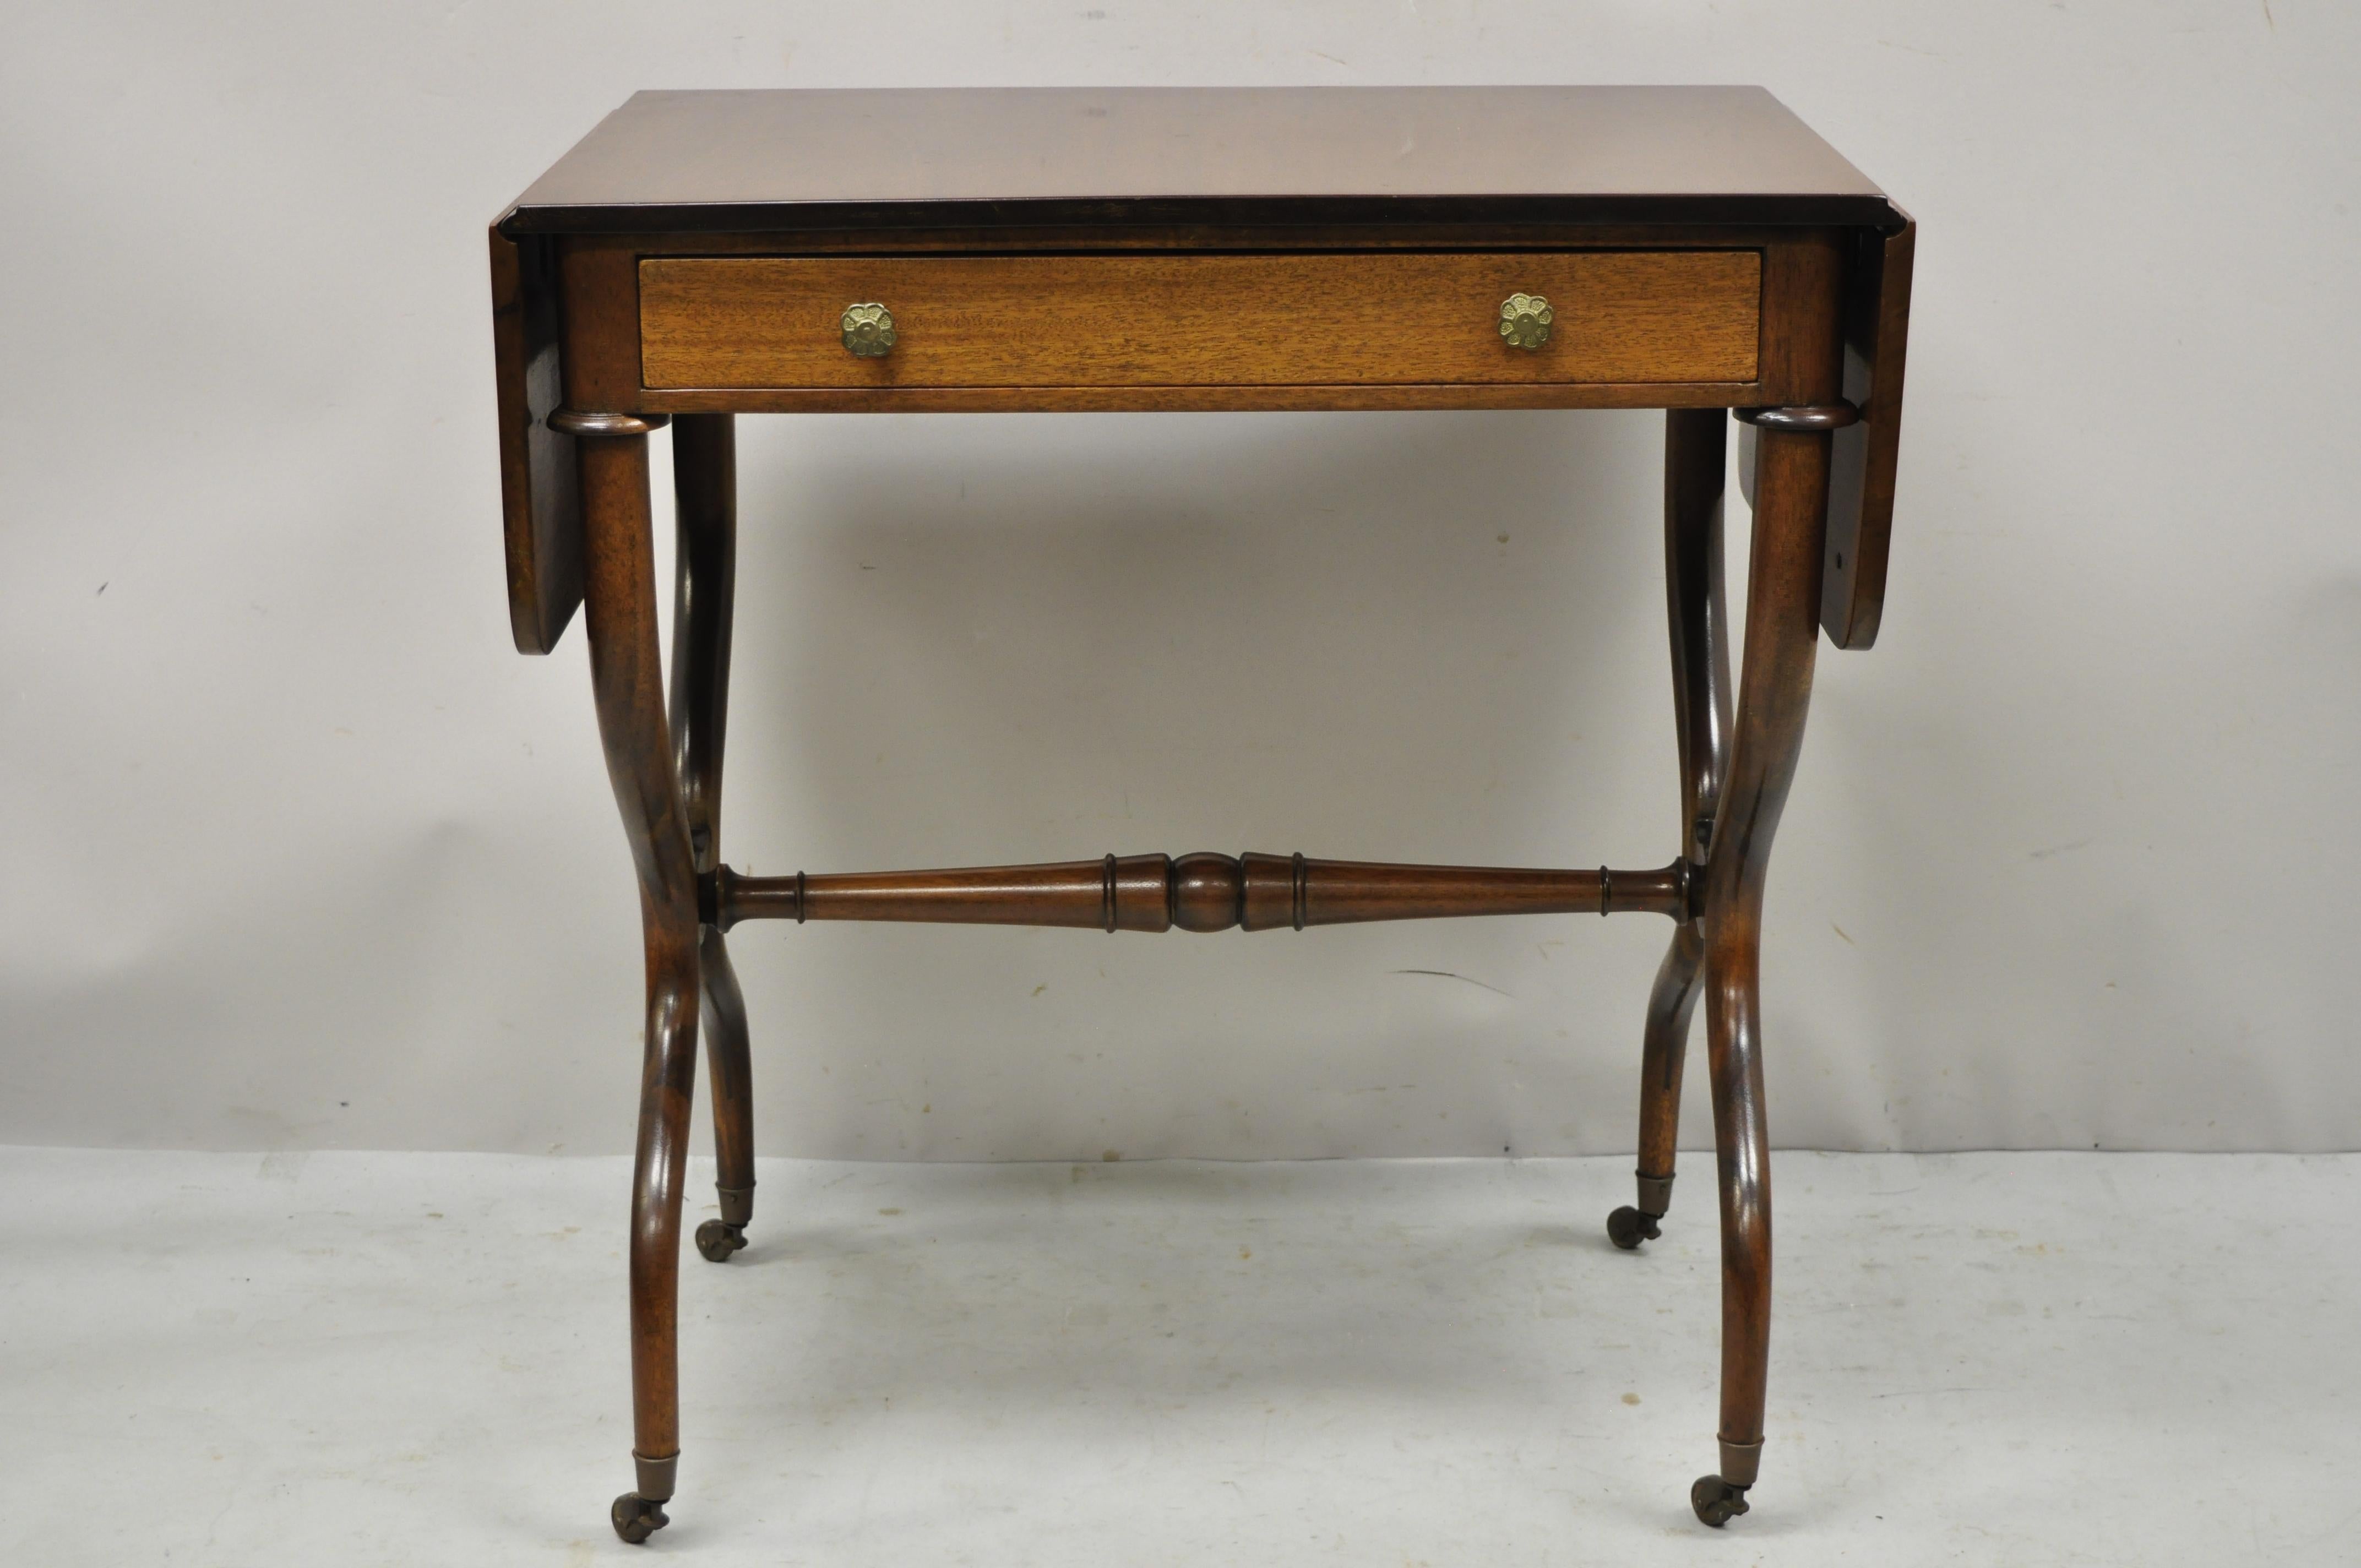 Vintage English Regency mahogany drop leaf pembroke one drawer lamp side table small desk. Item features 2 drop leaf sides, shapely stretcher base, brass rolling casters, beautiful wood grain, finished back, 1 dovetailed drawer, very nice vintage